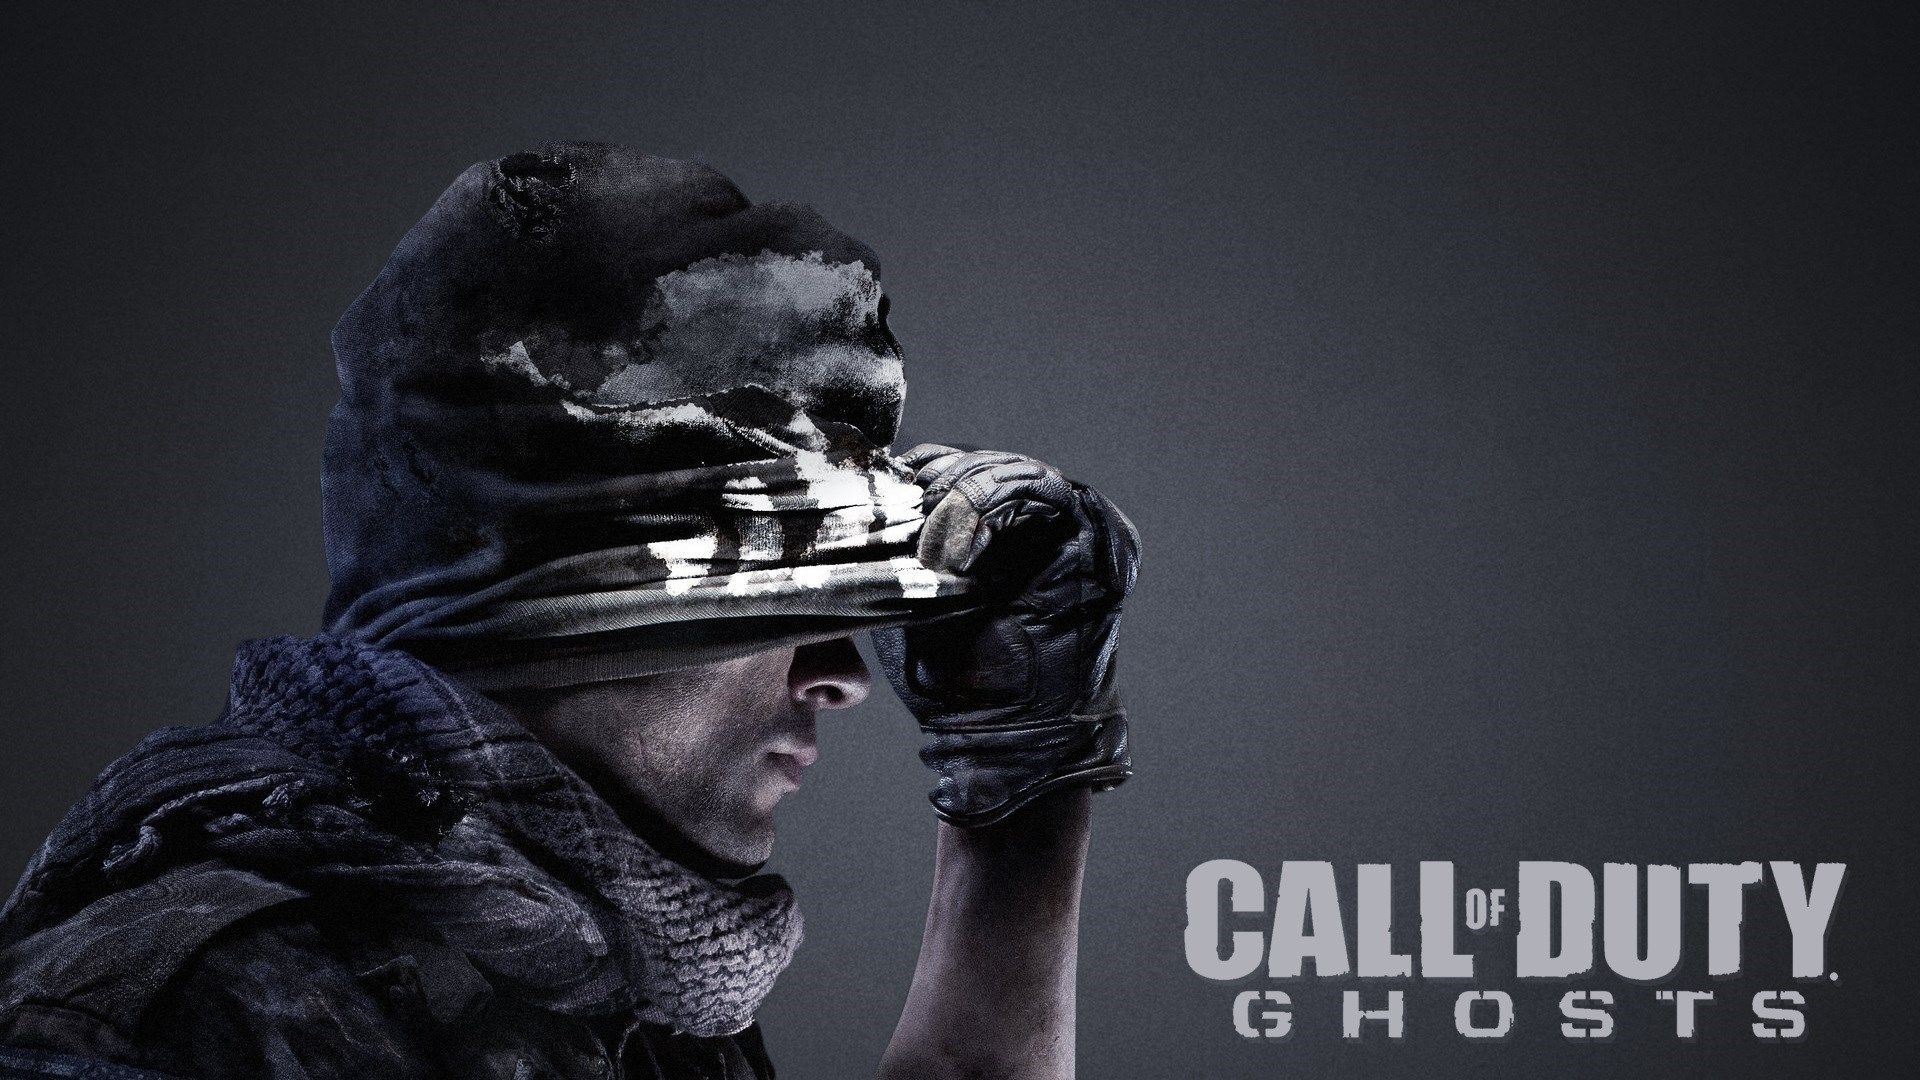 Call of Duty Ghosts Game